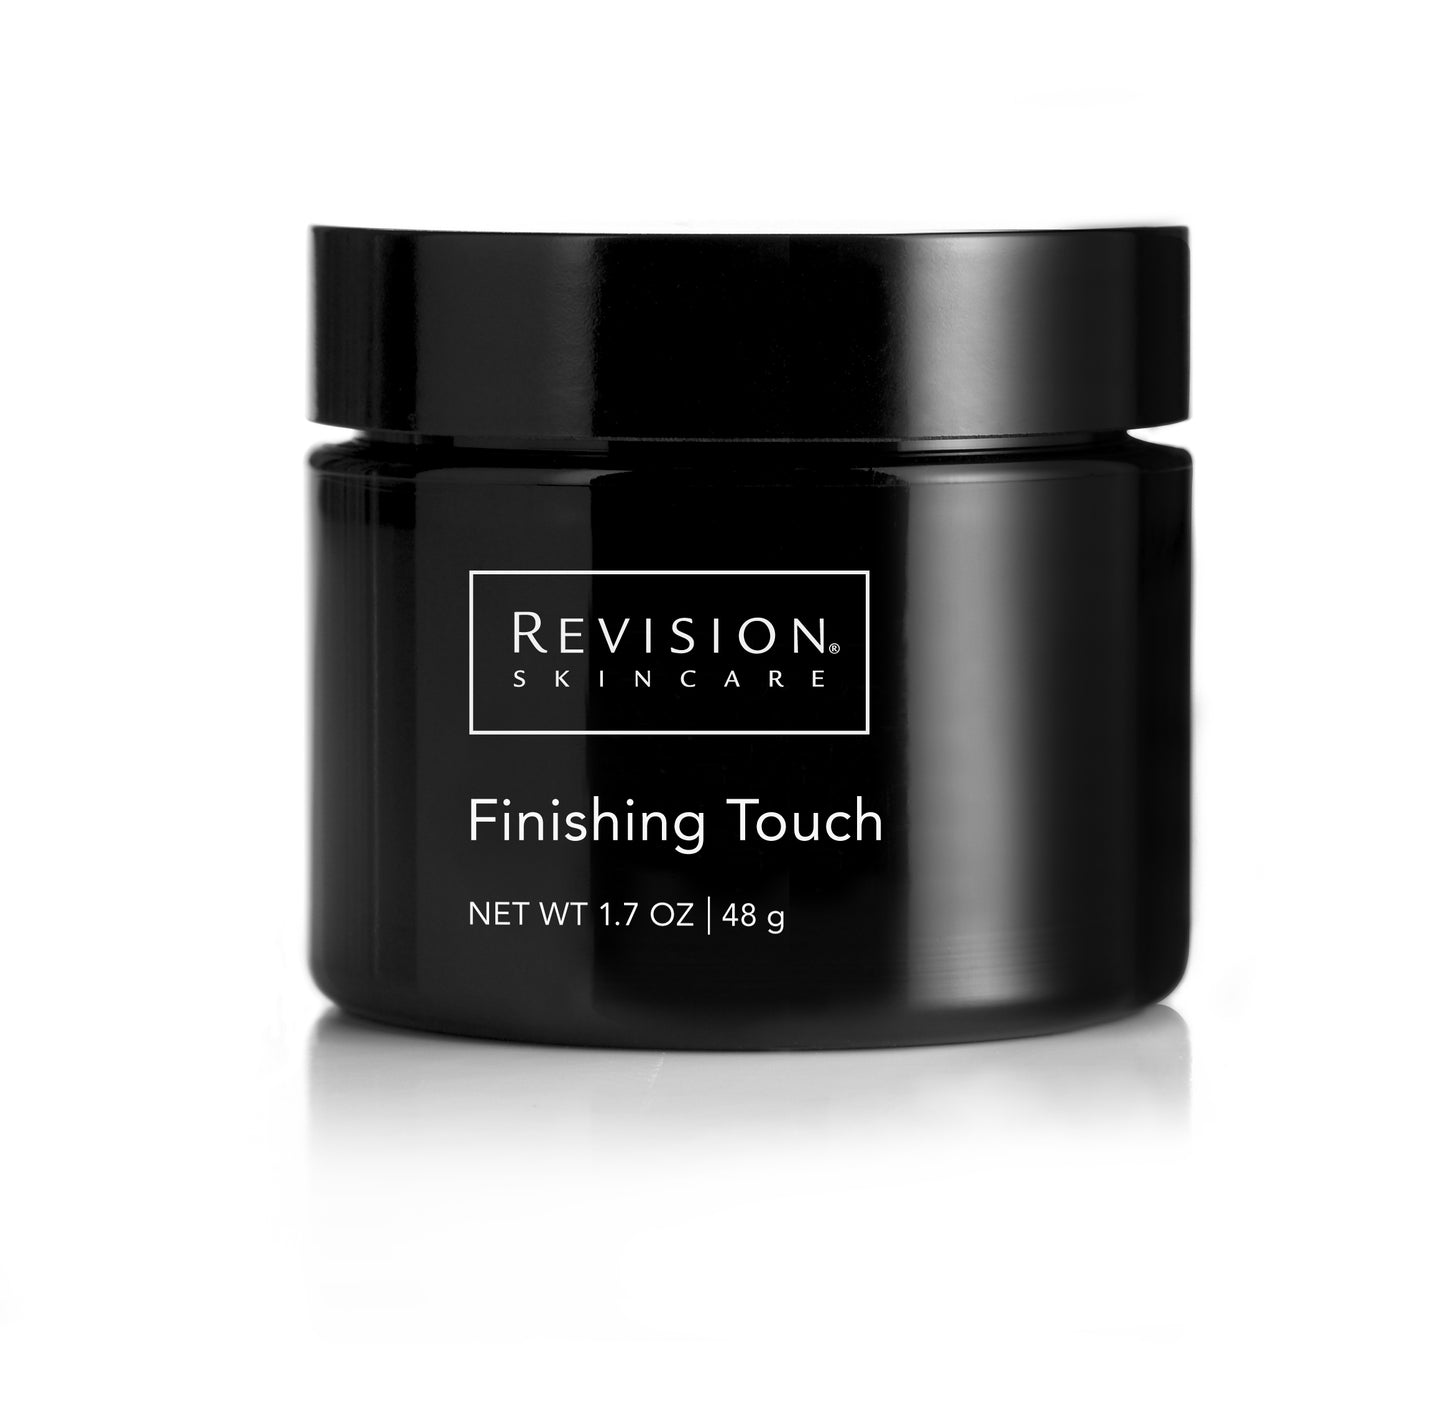 Revision - Finishing Touch - Microdermabrasion Scrub for Polishing Skin